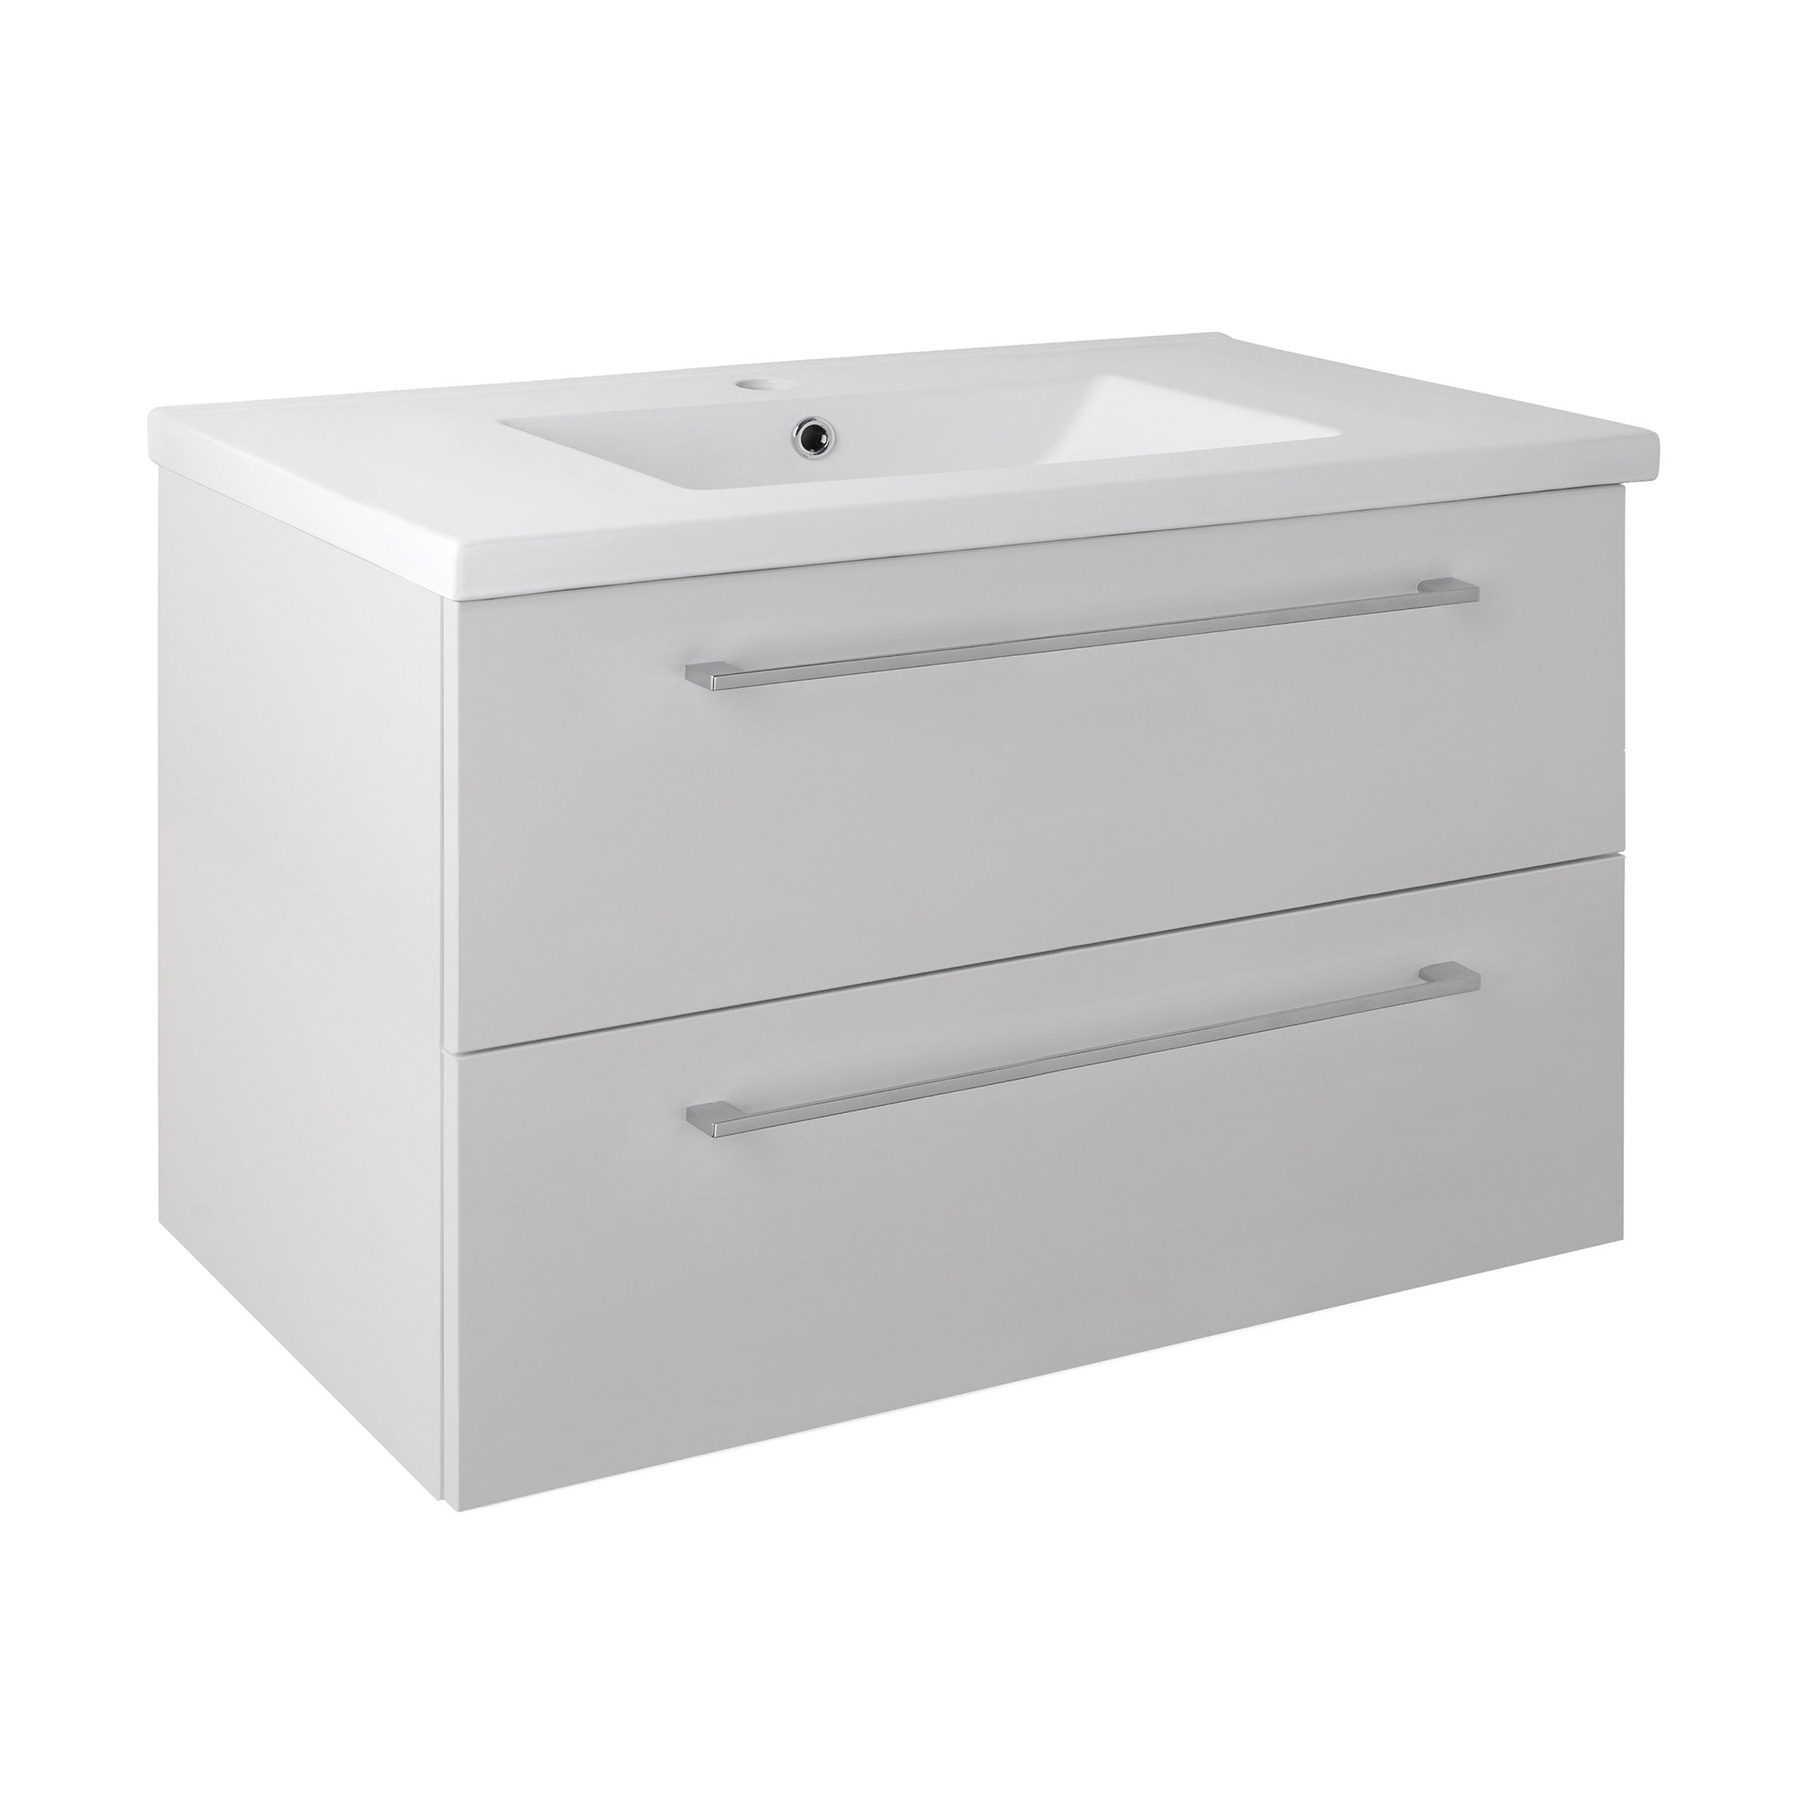 QS Basics Tempo Wall-Mounted Double Drawer Unit With Basin